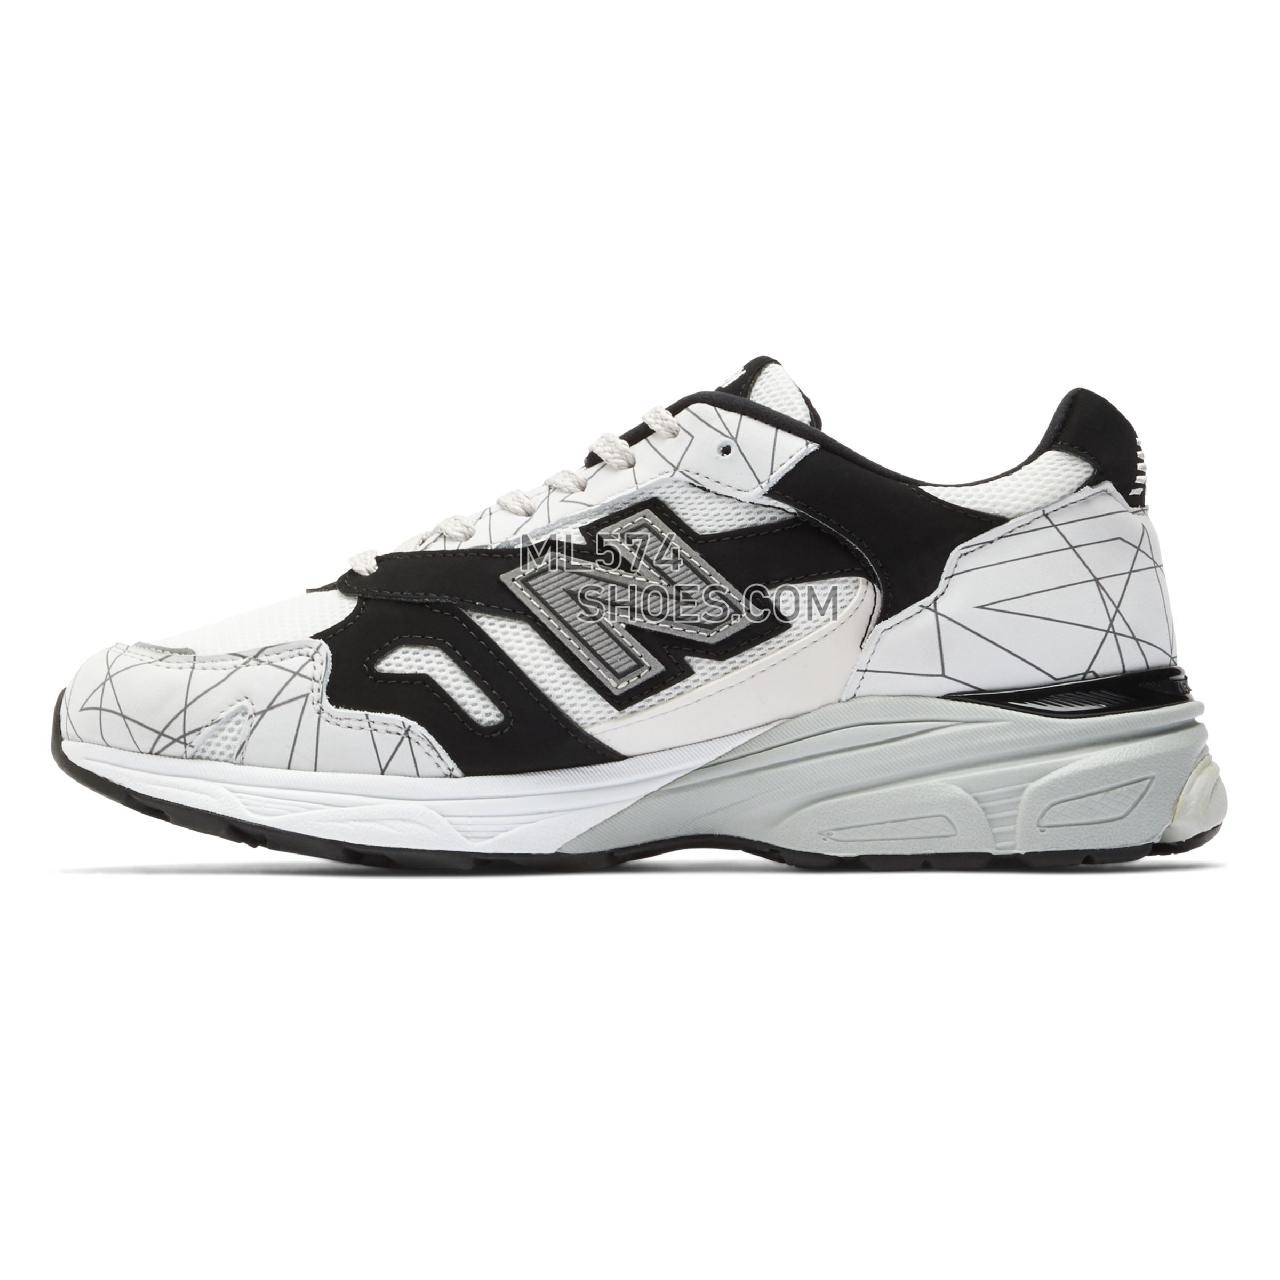 New Balance MADE in UK 920 - Men's Made in USA And UK Sneakers - Pale Gray with Black and White - M920PNU